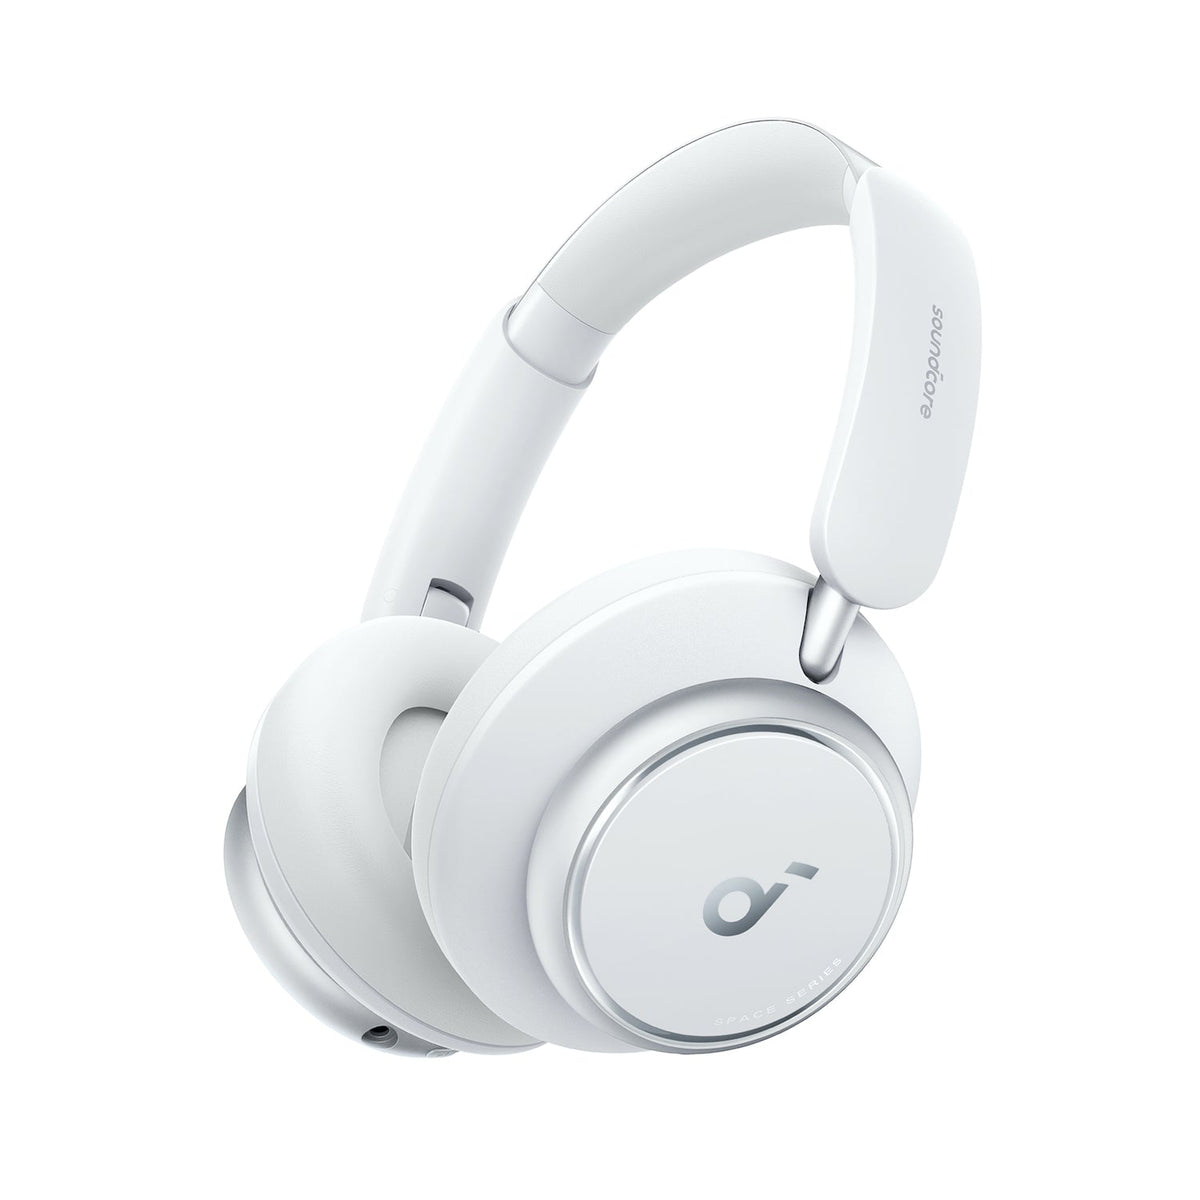 Buy Space Q45 All-New Noise Cancelling Headphones